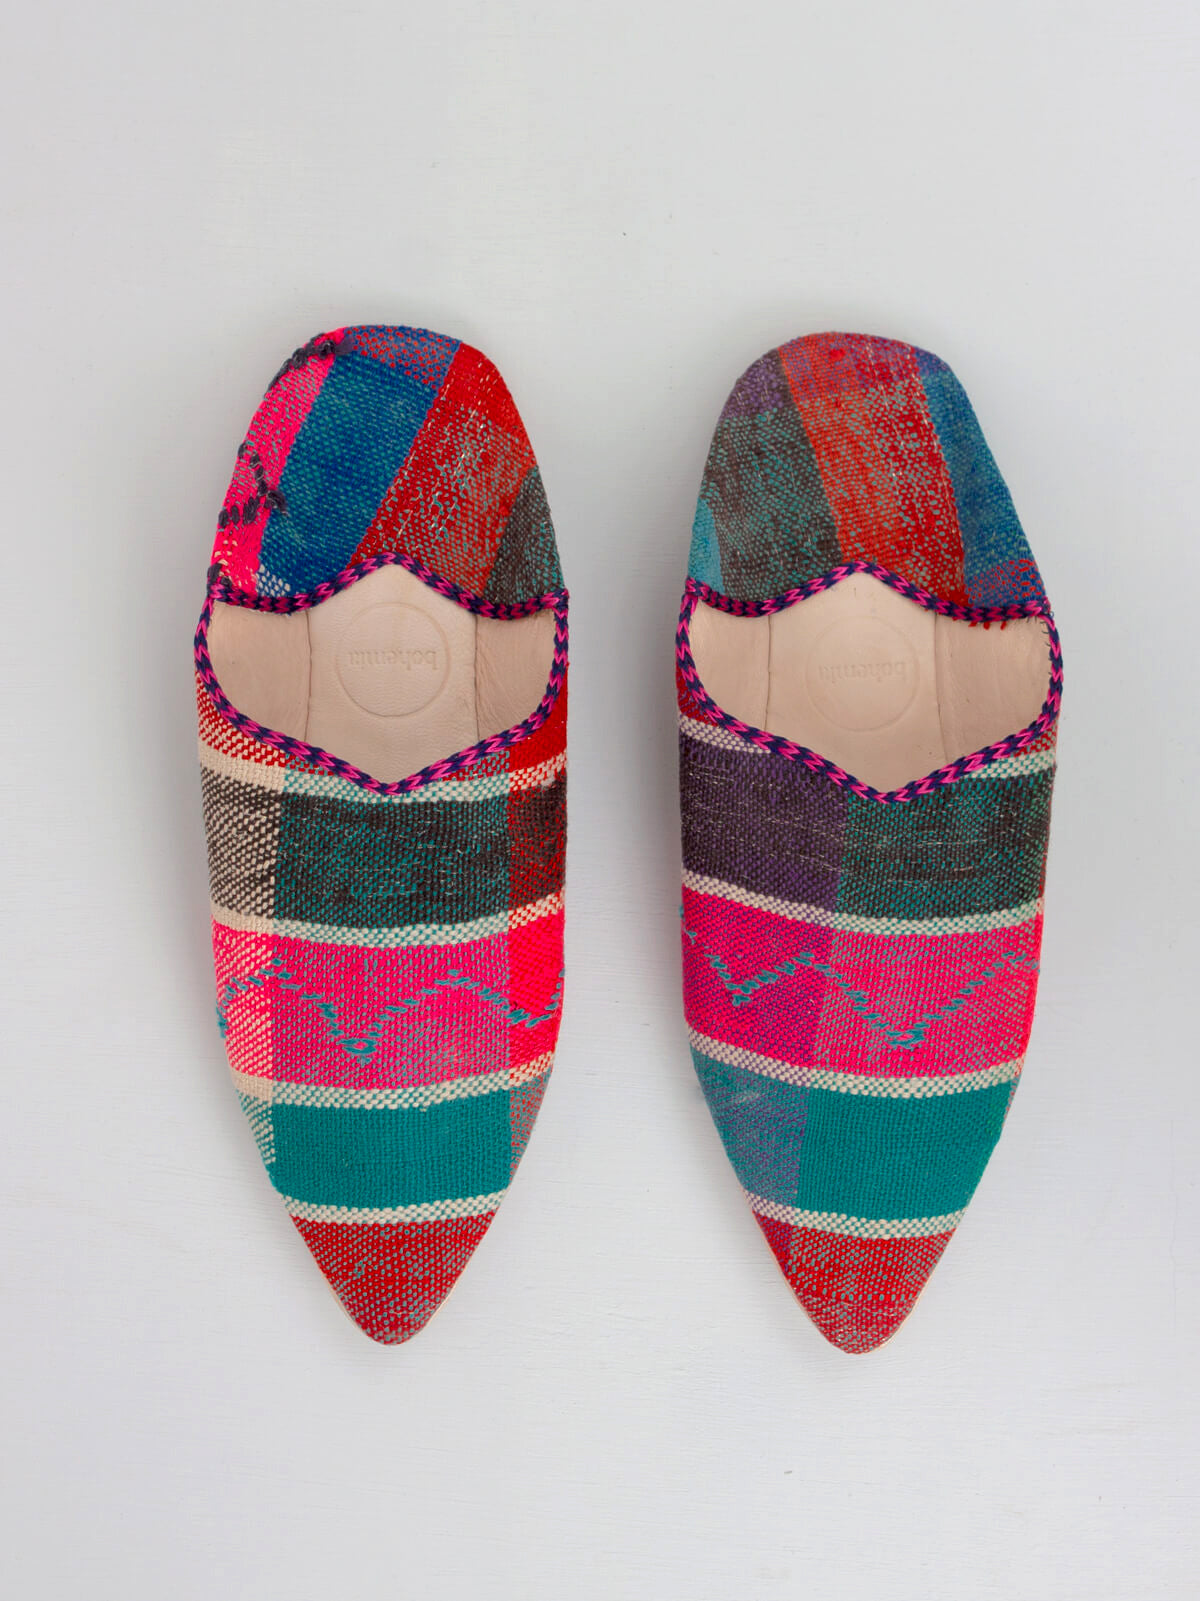 Moroccan Boujad Pointed Babouche Slippers, Marrakech